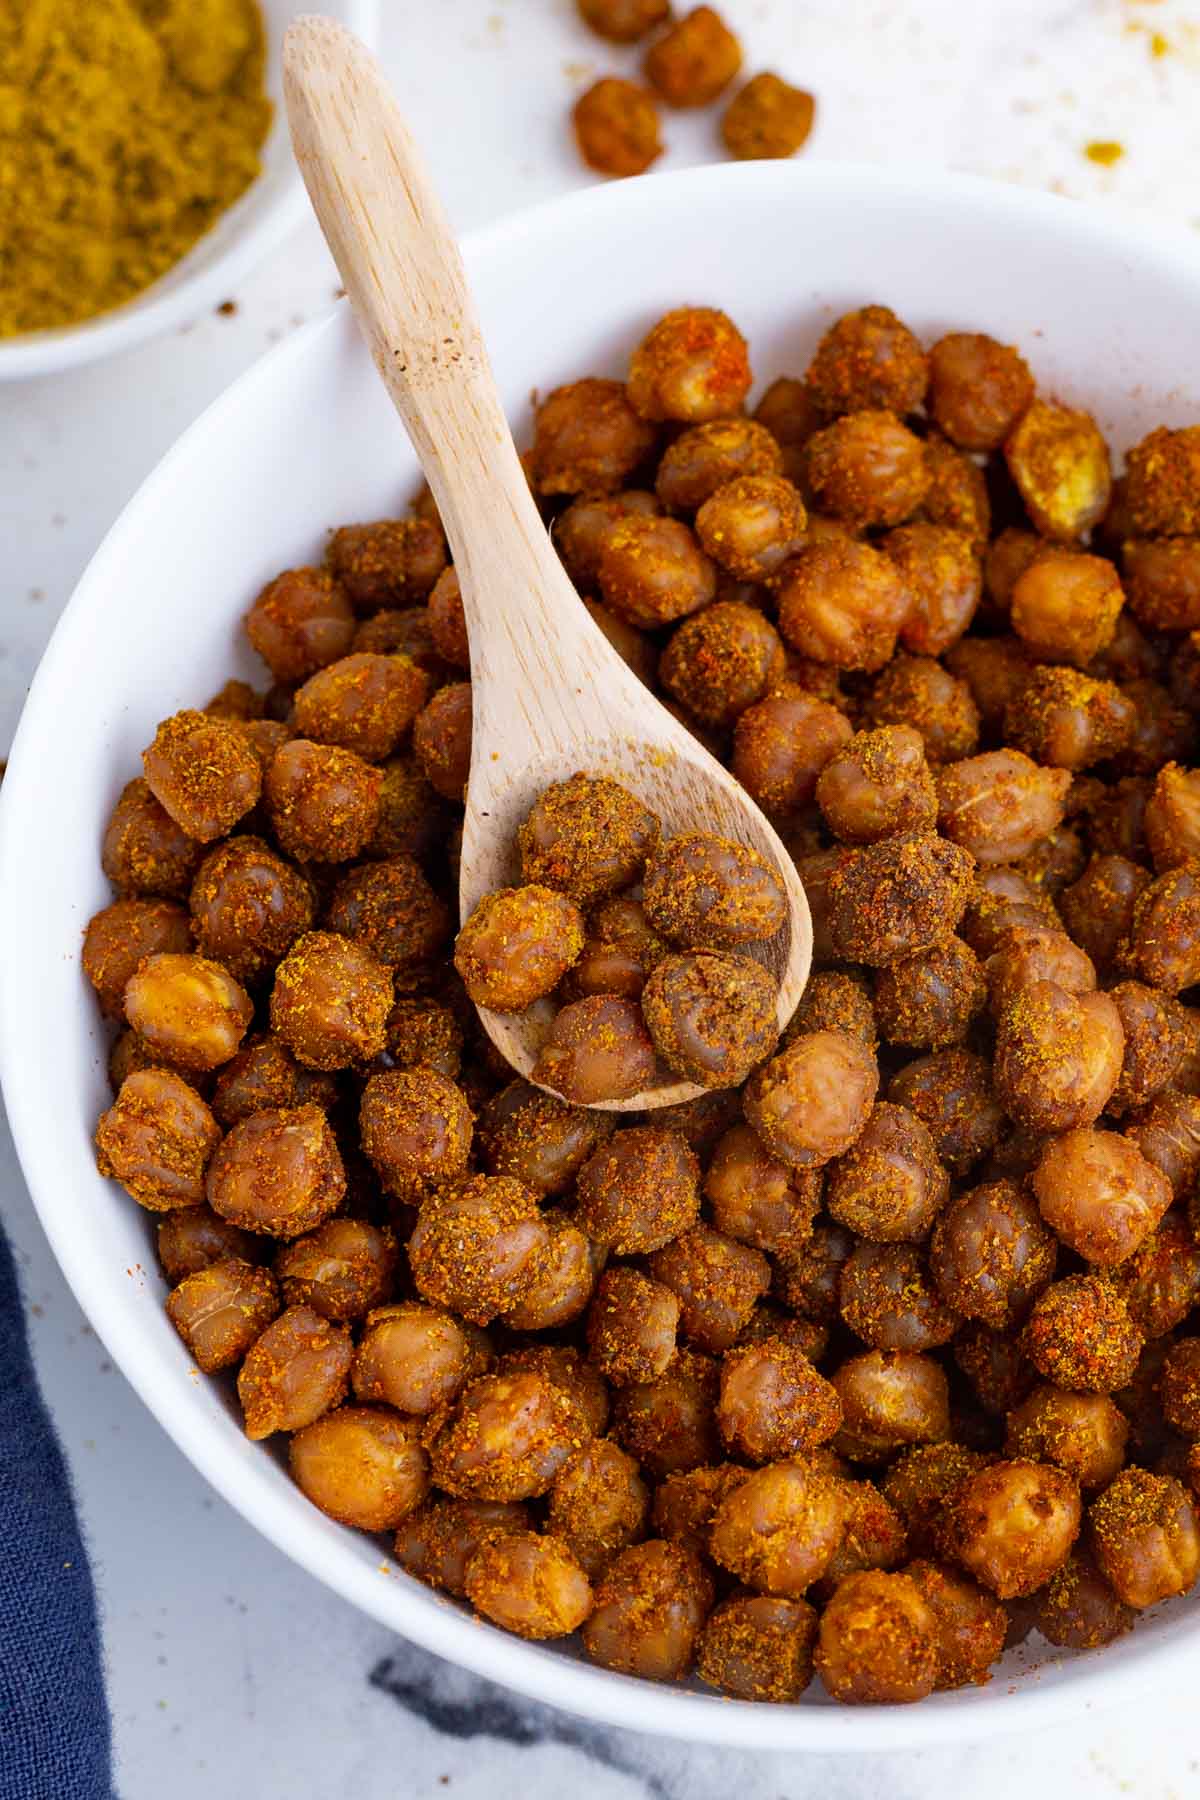 A bowl roasted chickpeas are served in a bowl with a scoop.